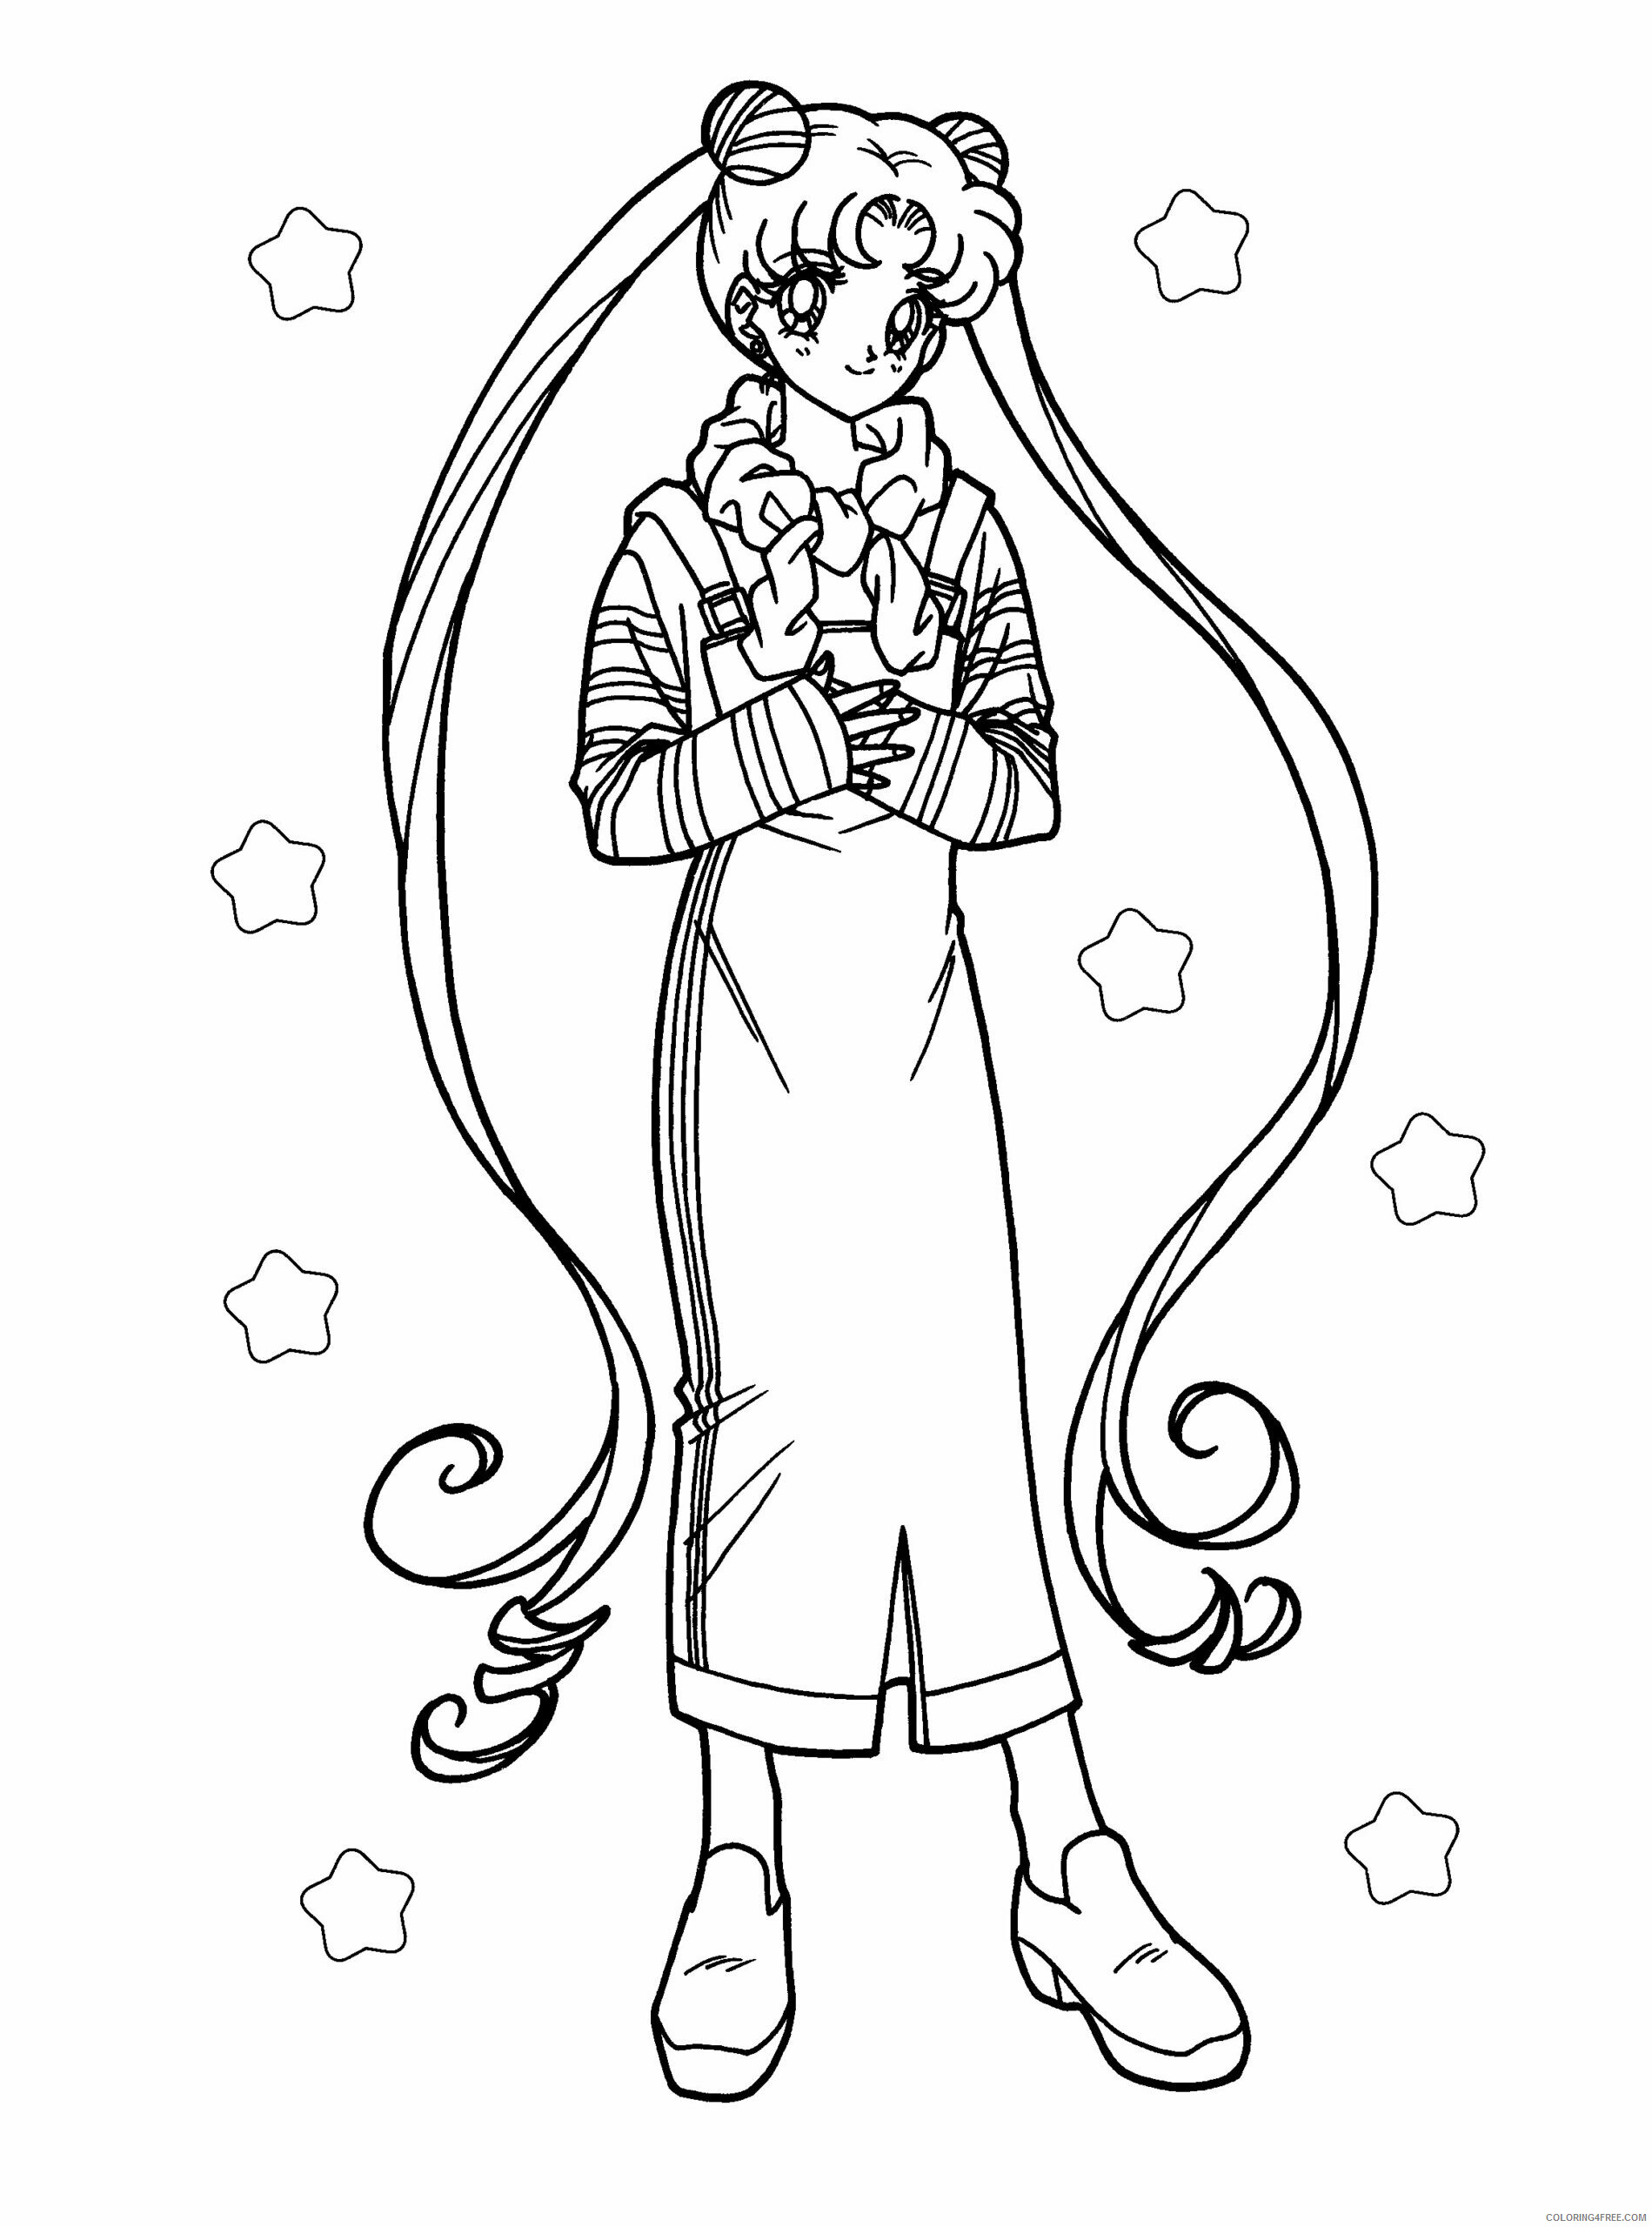 Sailor Moon Printable Coloring Pages Anime sailormoon kJvcG 2021 0990 Coloring4free